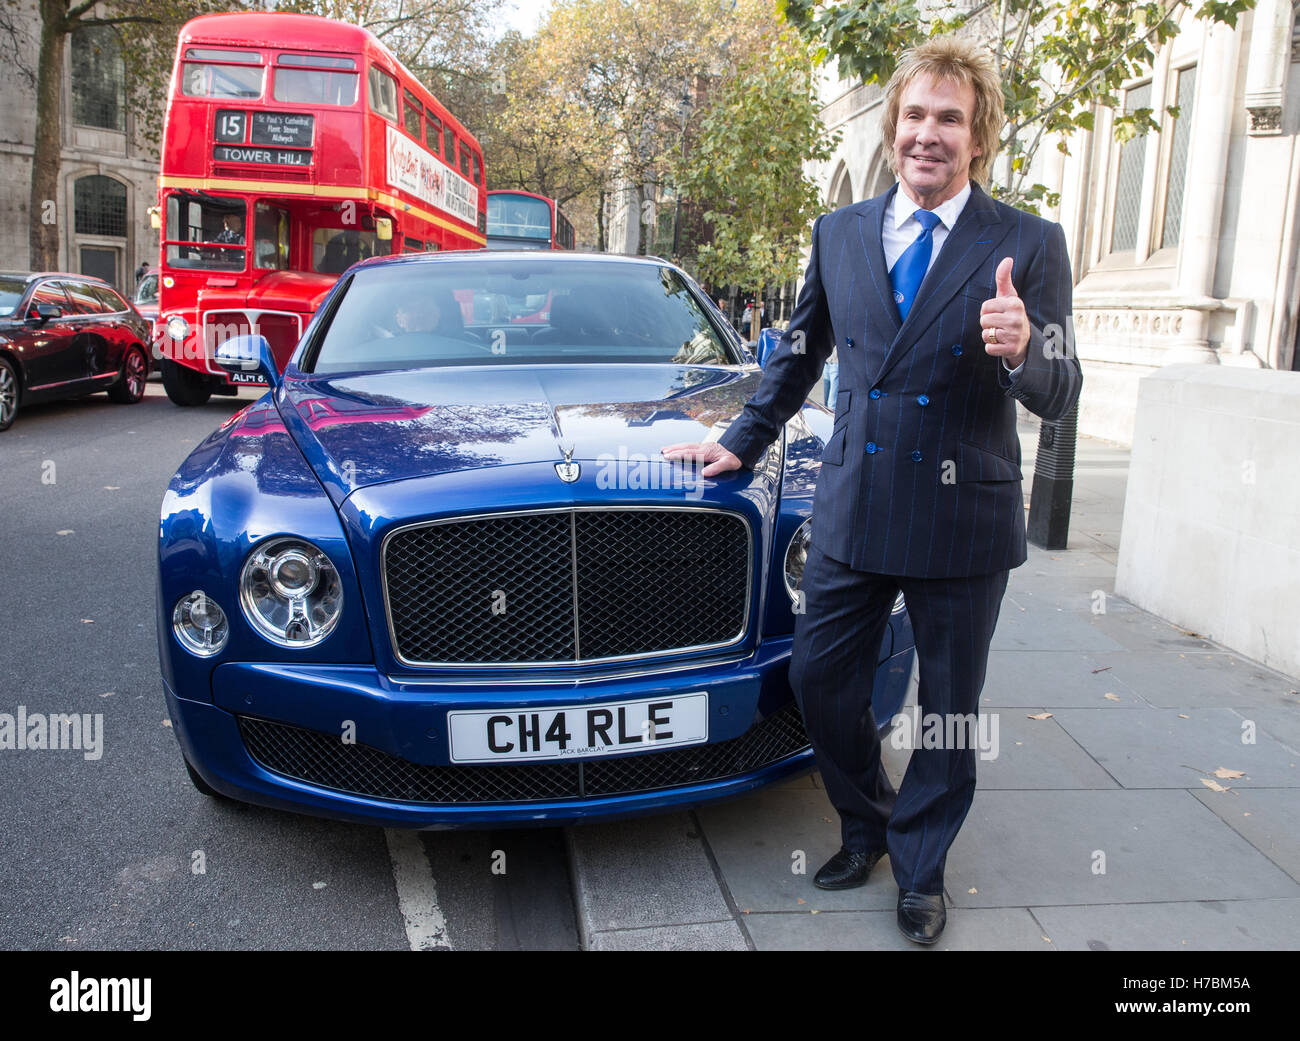 Managing Director of Pimlico Plumbers,Charlie Mullins,gives the thumbs up after the judges gave their verdict on the Brexit case Stock Photo